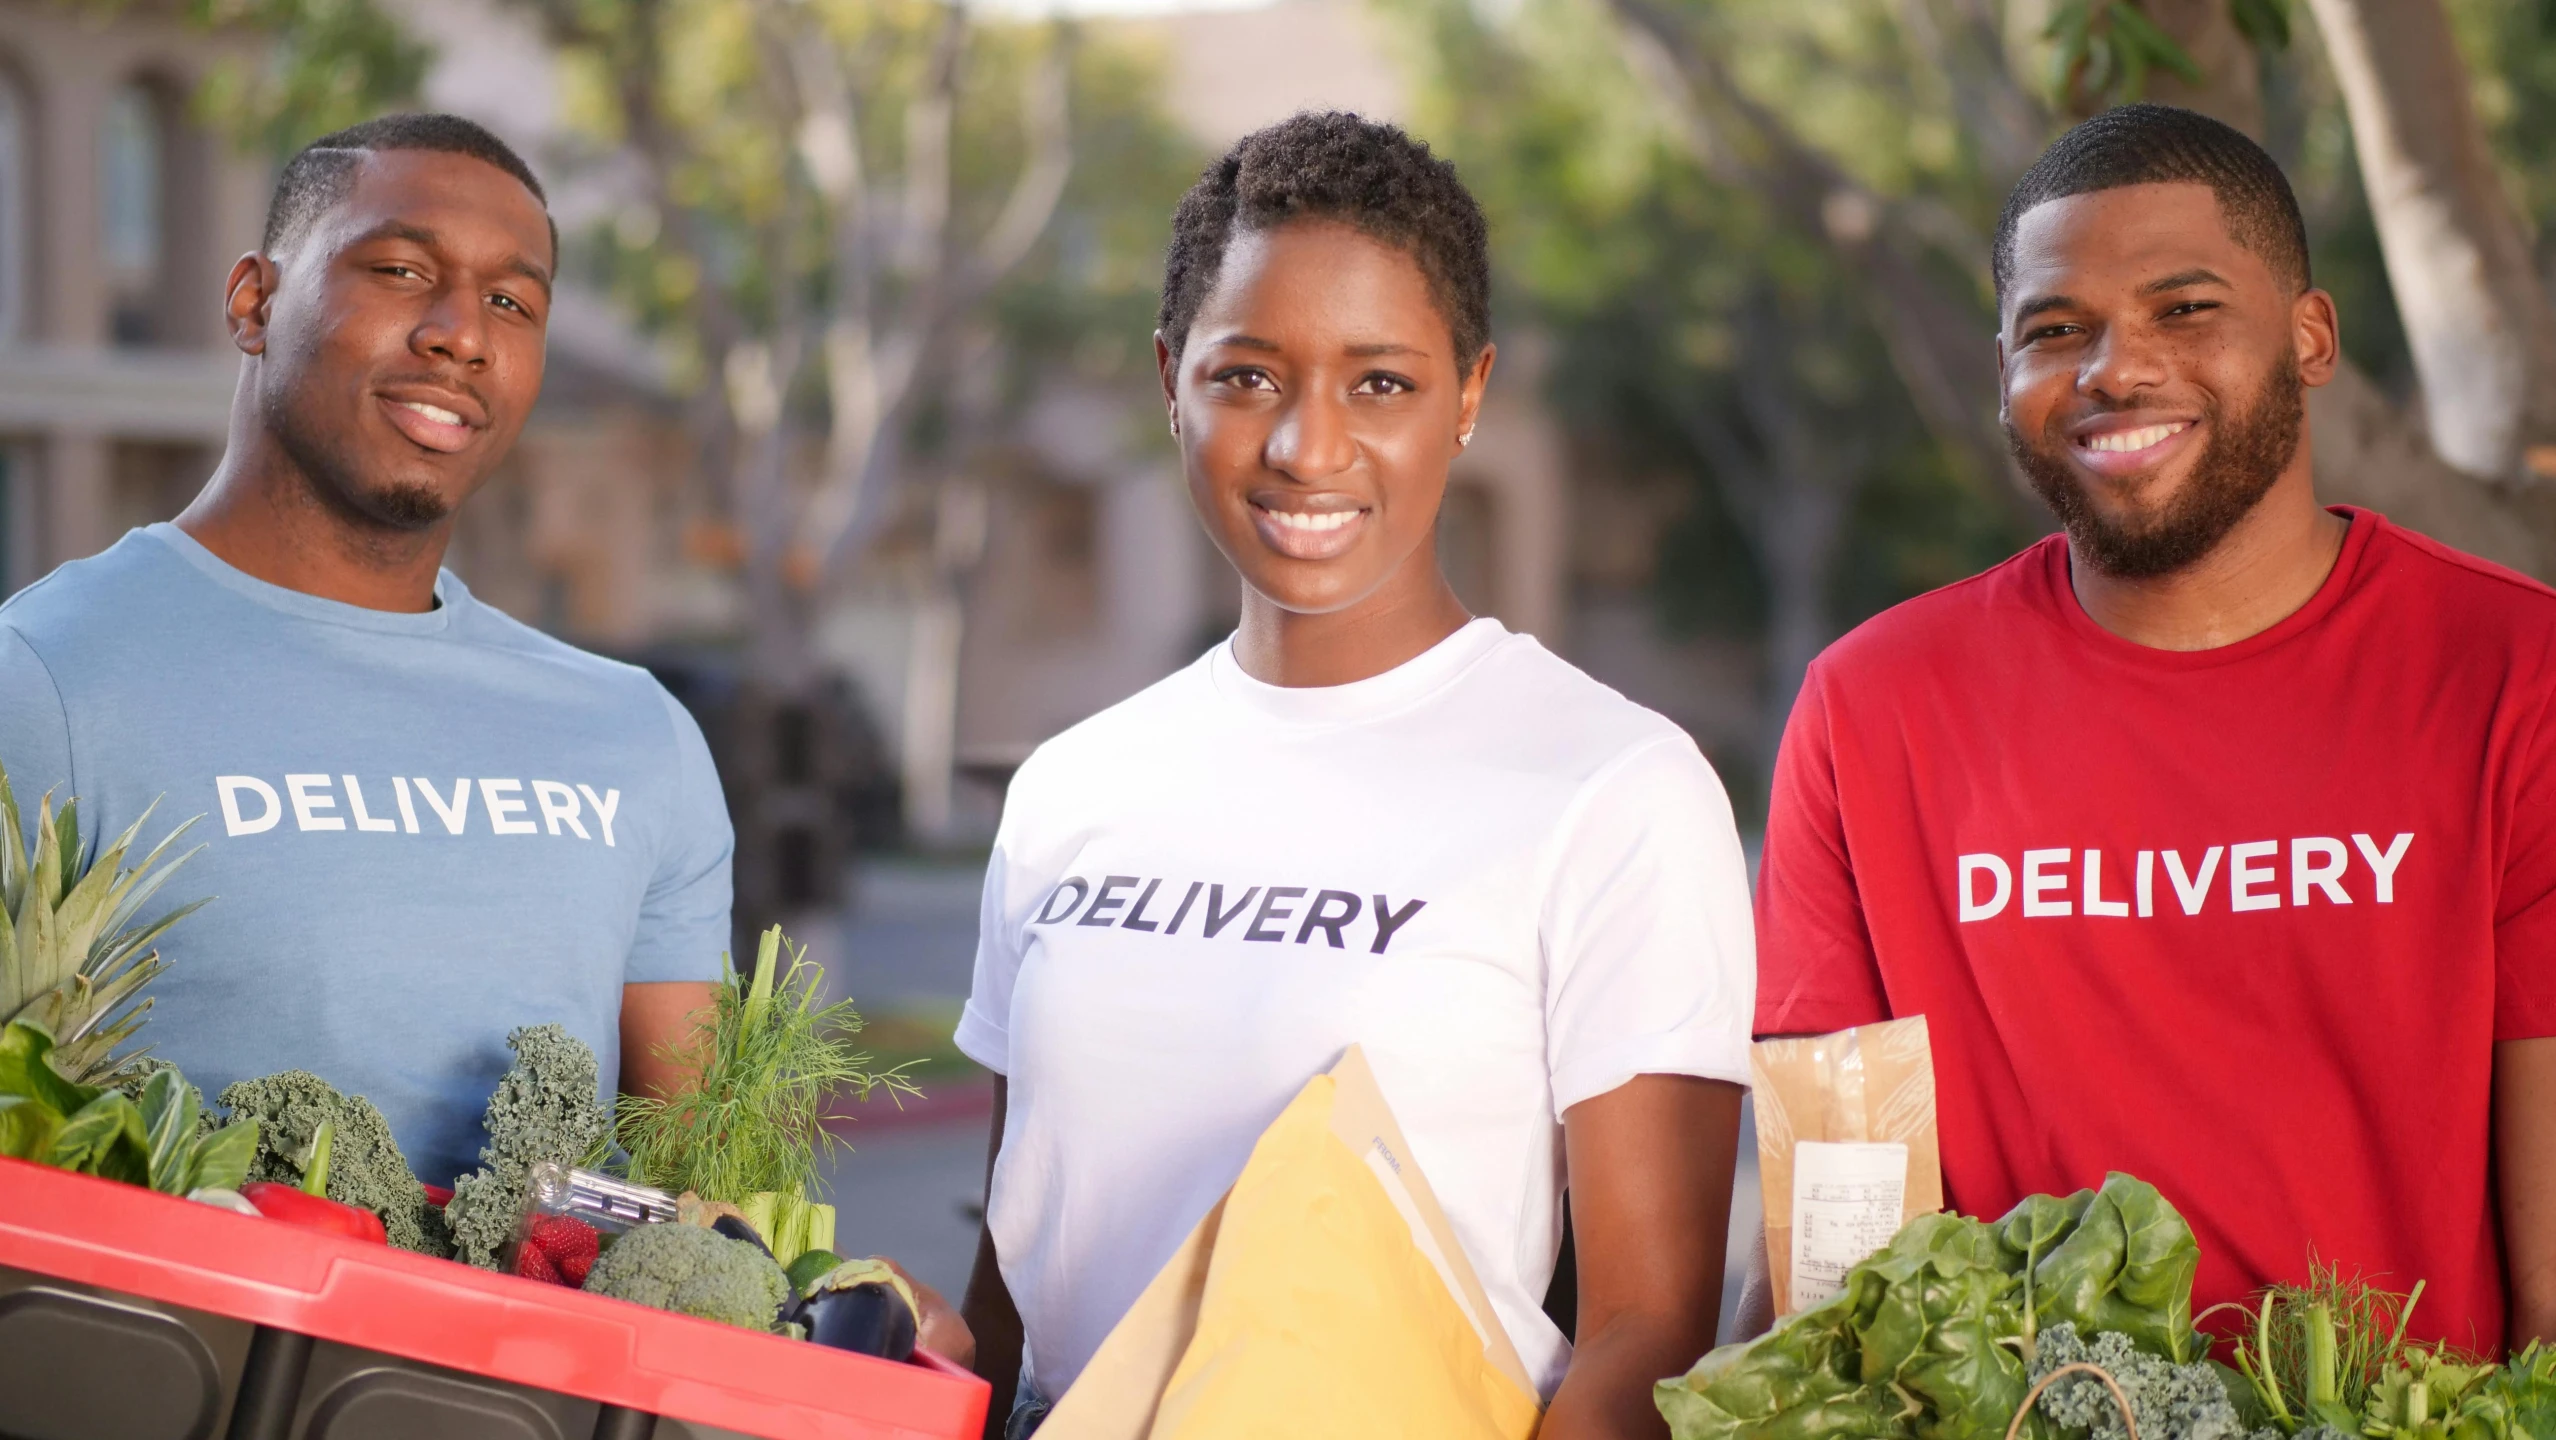 a group of three people standing next to each other, getting groceries, promotional image, mkbhd, portrait image